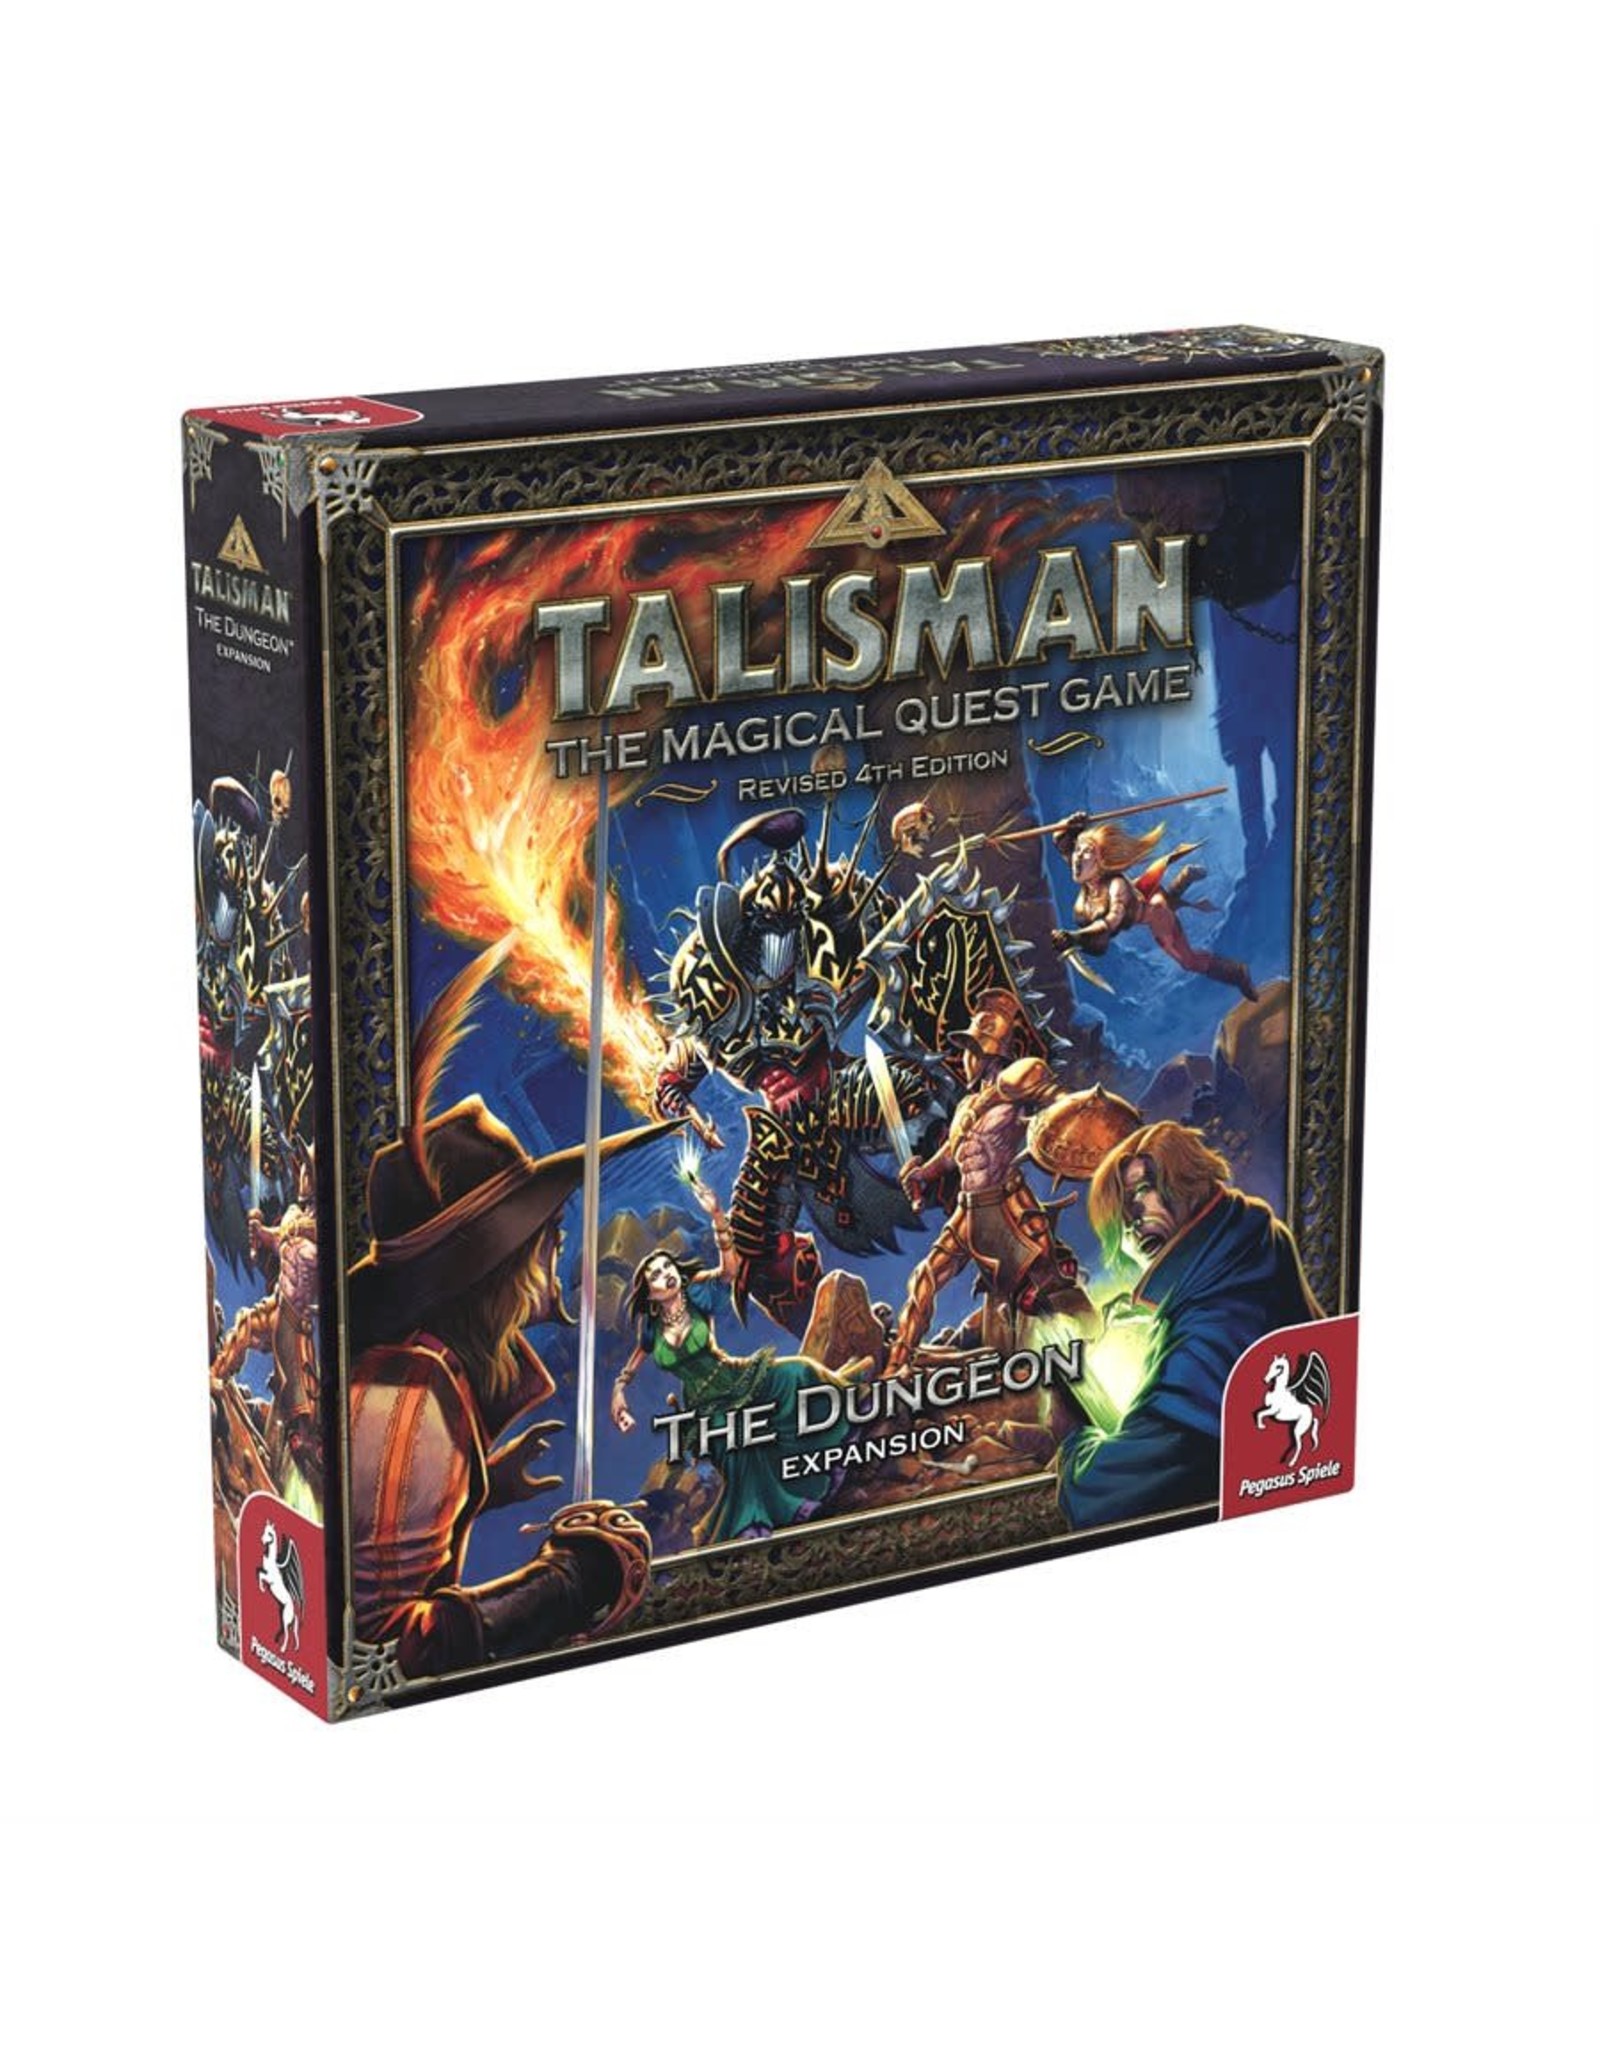 Talisman Expansion The Dungeon